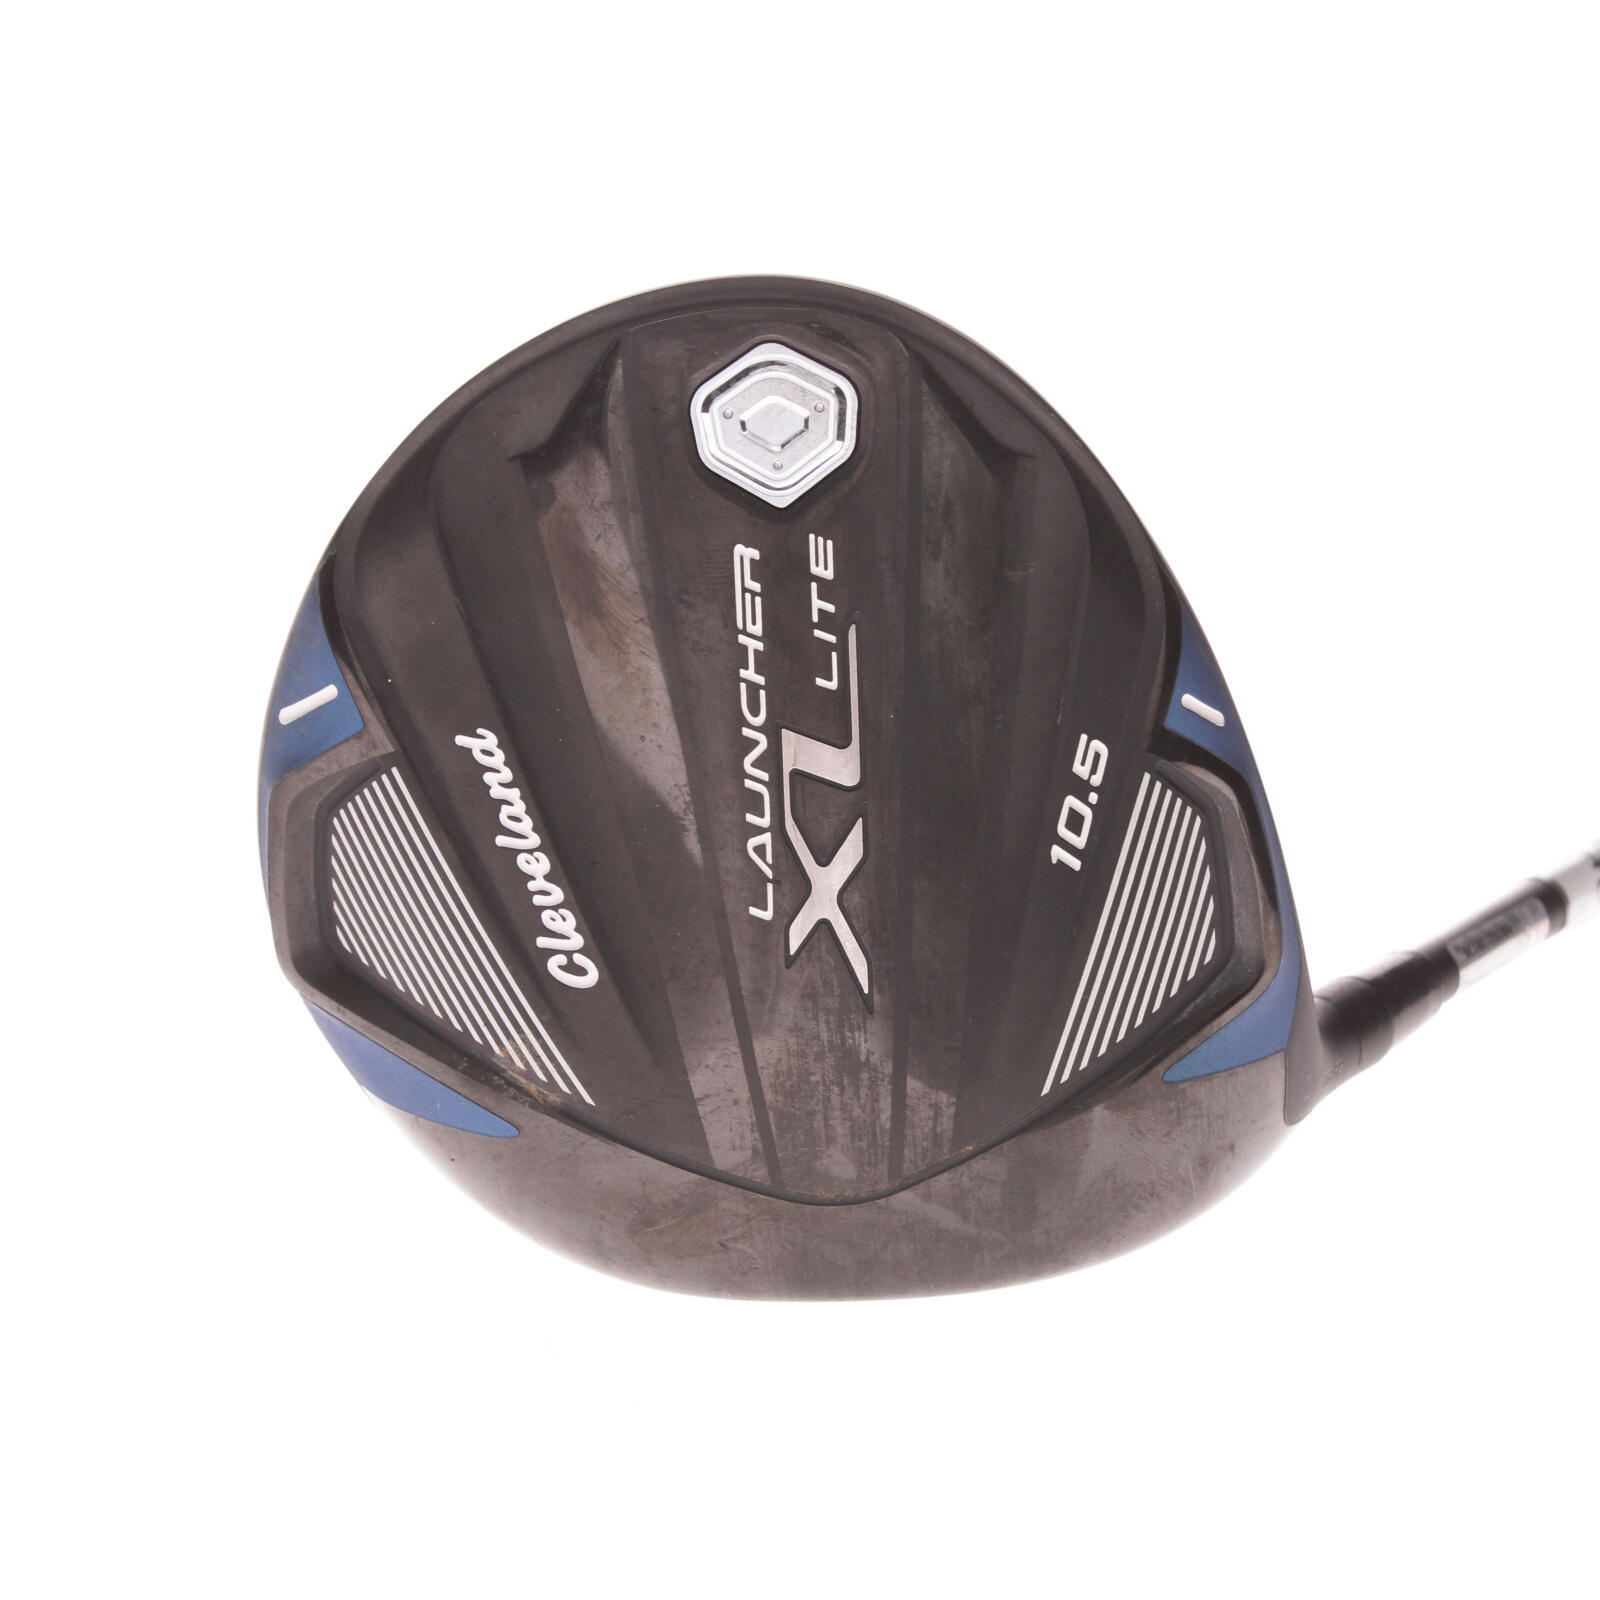 CLEVELAND GOLF USED -  Driver Cleveland Launcher XL Lite 10.5* Graphite Left Handed - GRADE B